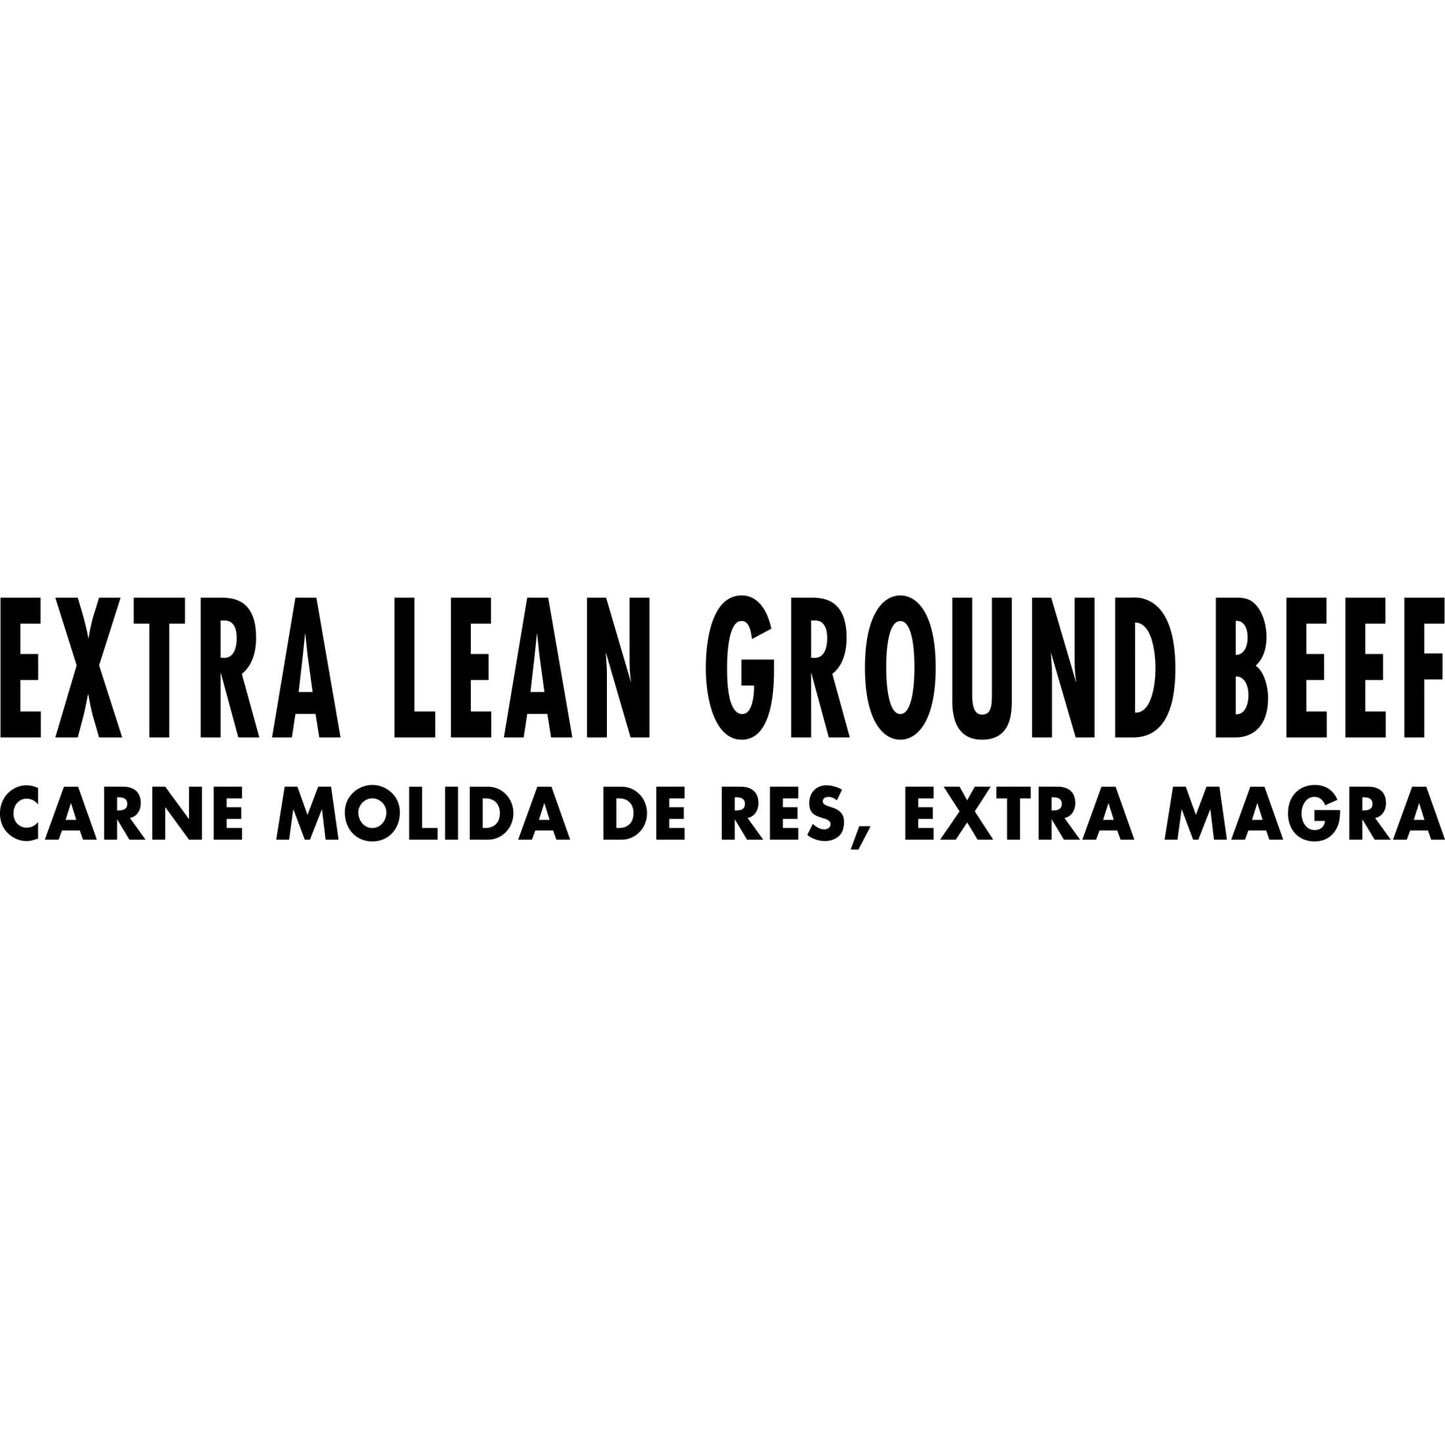 All Natural* 96% Lean/4% Fat Extra Lean Ground Beef, 1 lb Roll